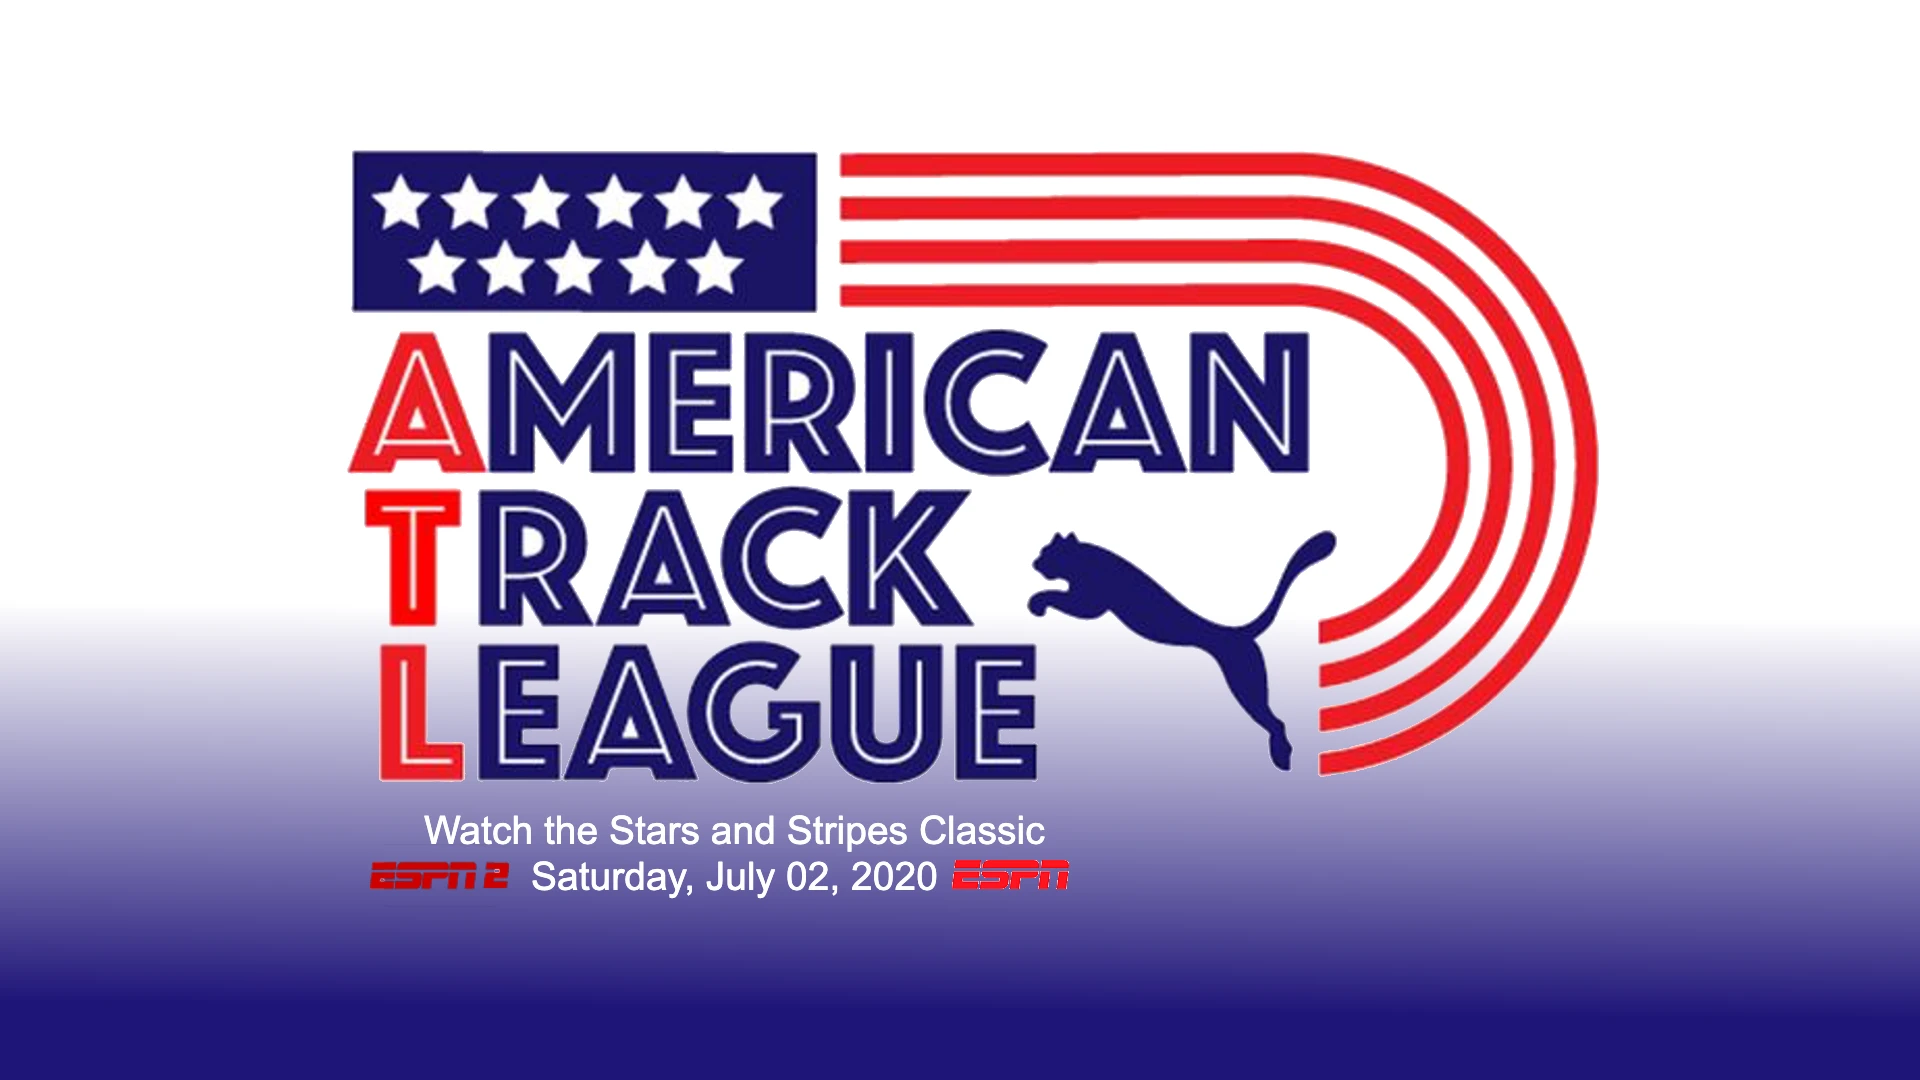 How to watch the Stars and Stripes Classic – American Track League 2022?